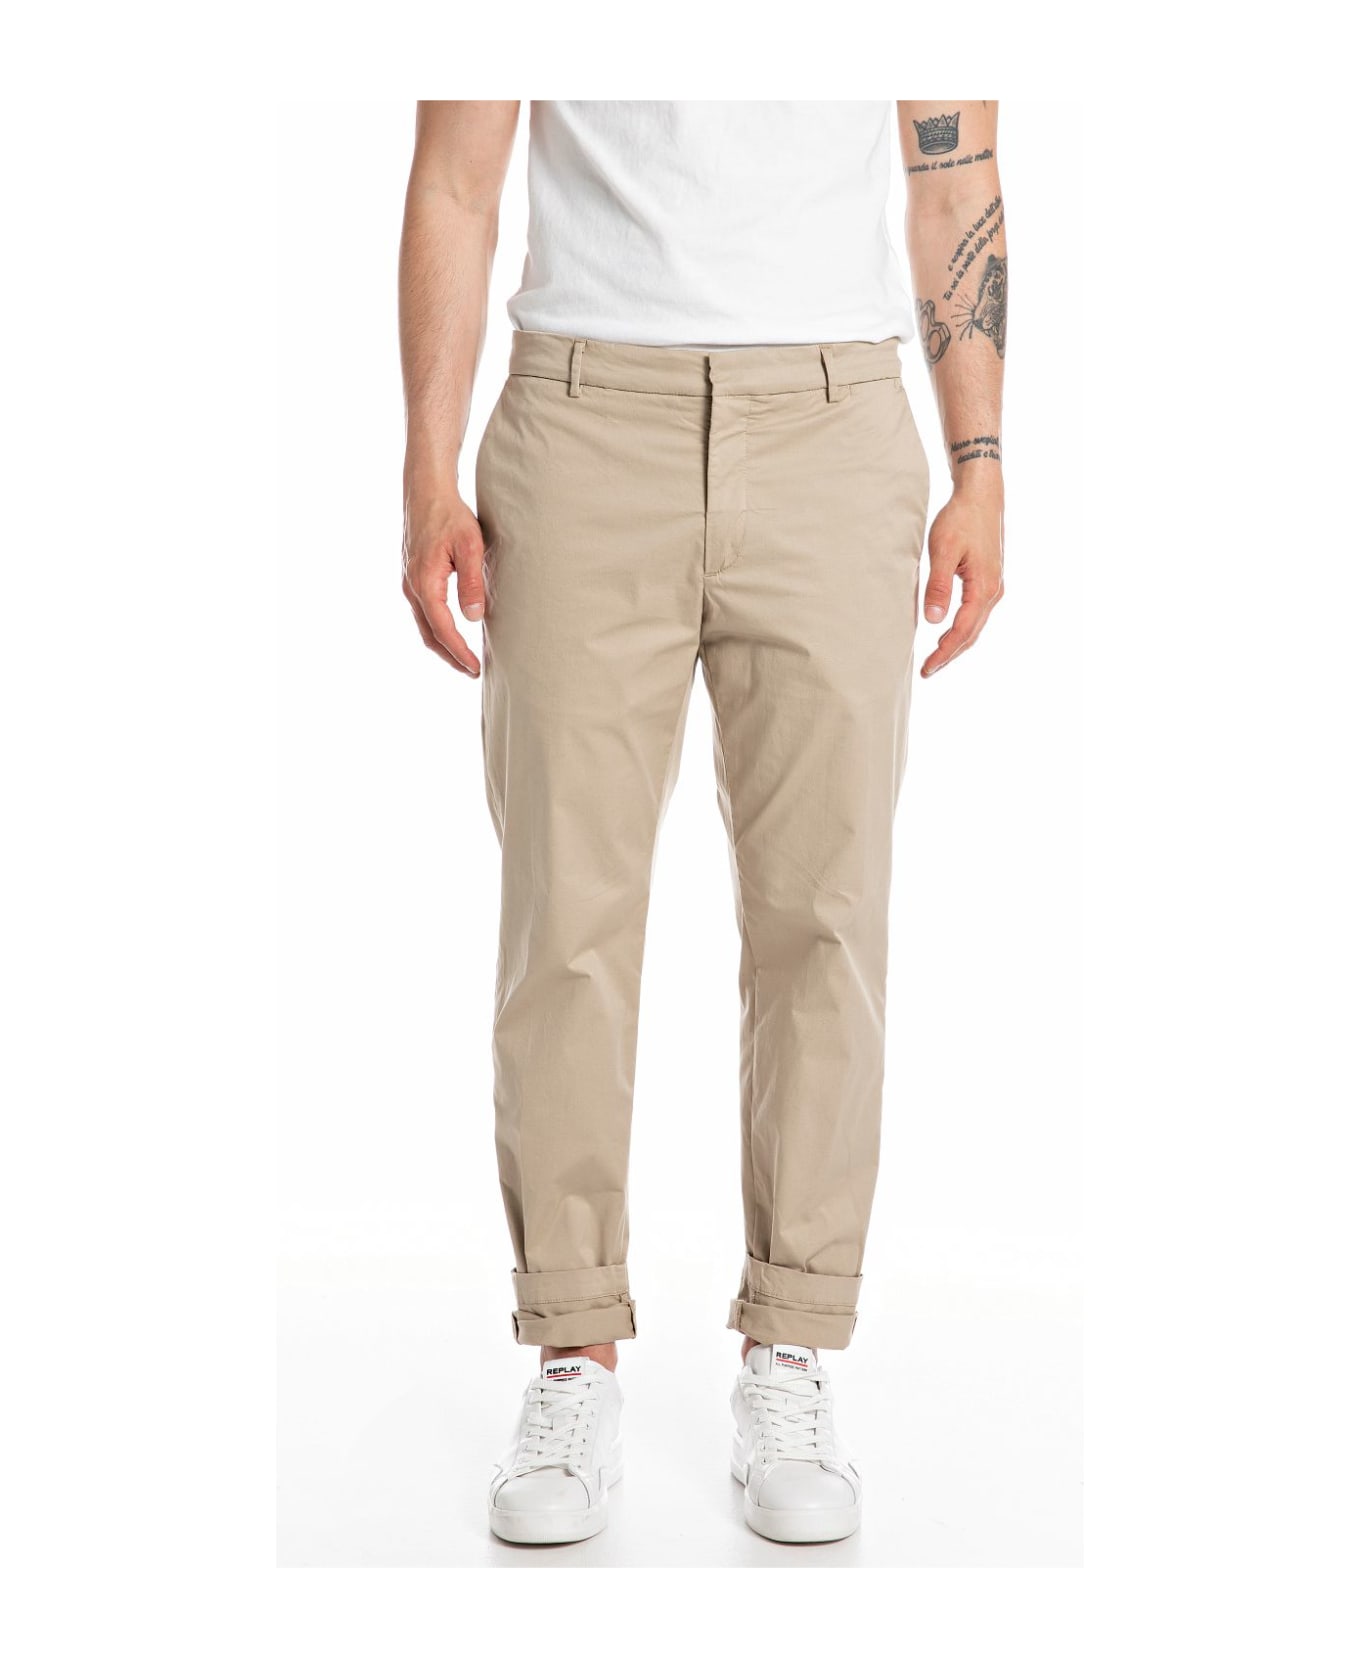 Replay Trousers - Beige ボトムス